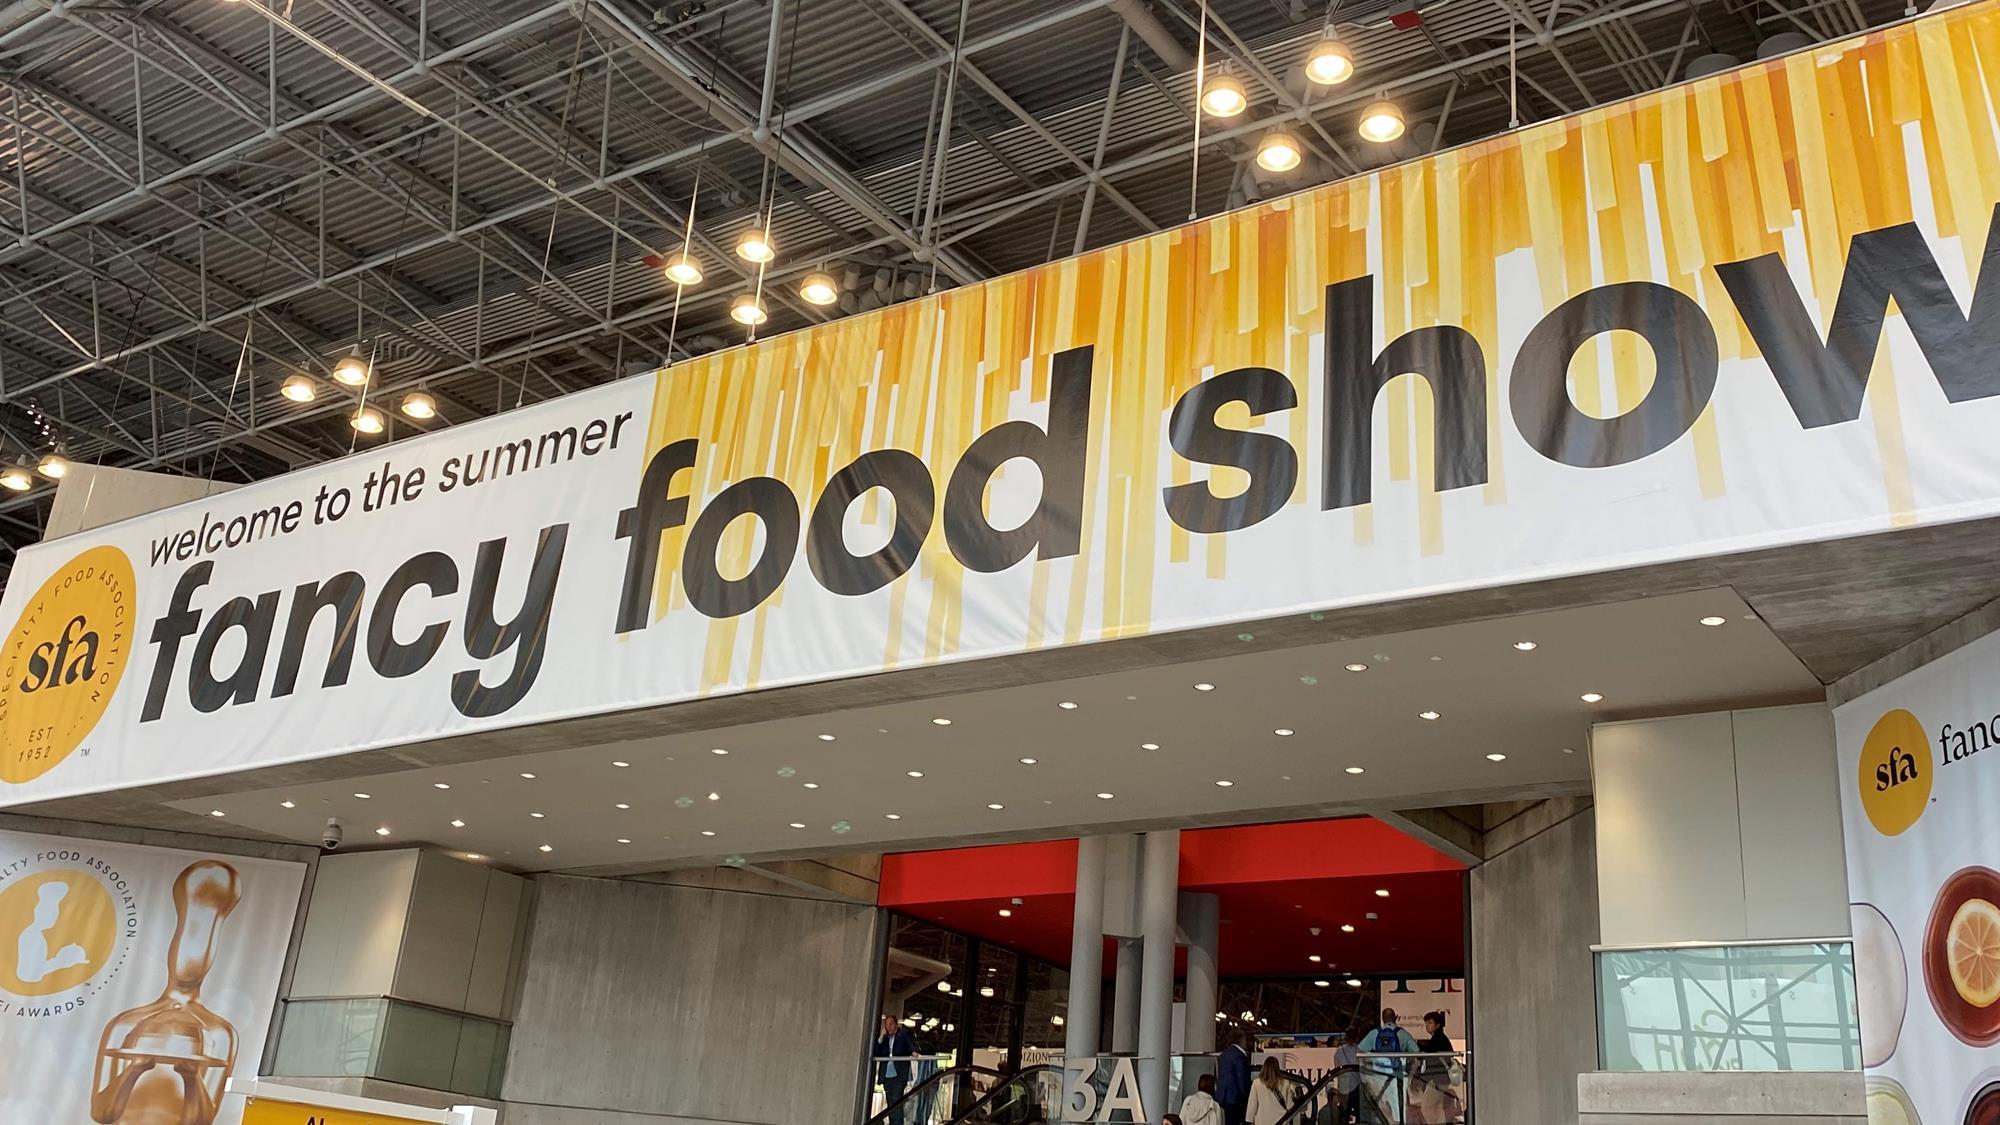 New York Fancy Food Show 2022 top 10 emerging food trends Analysis